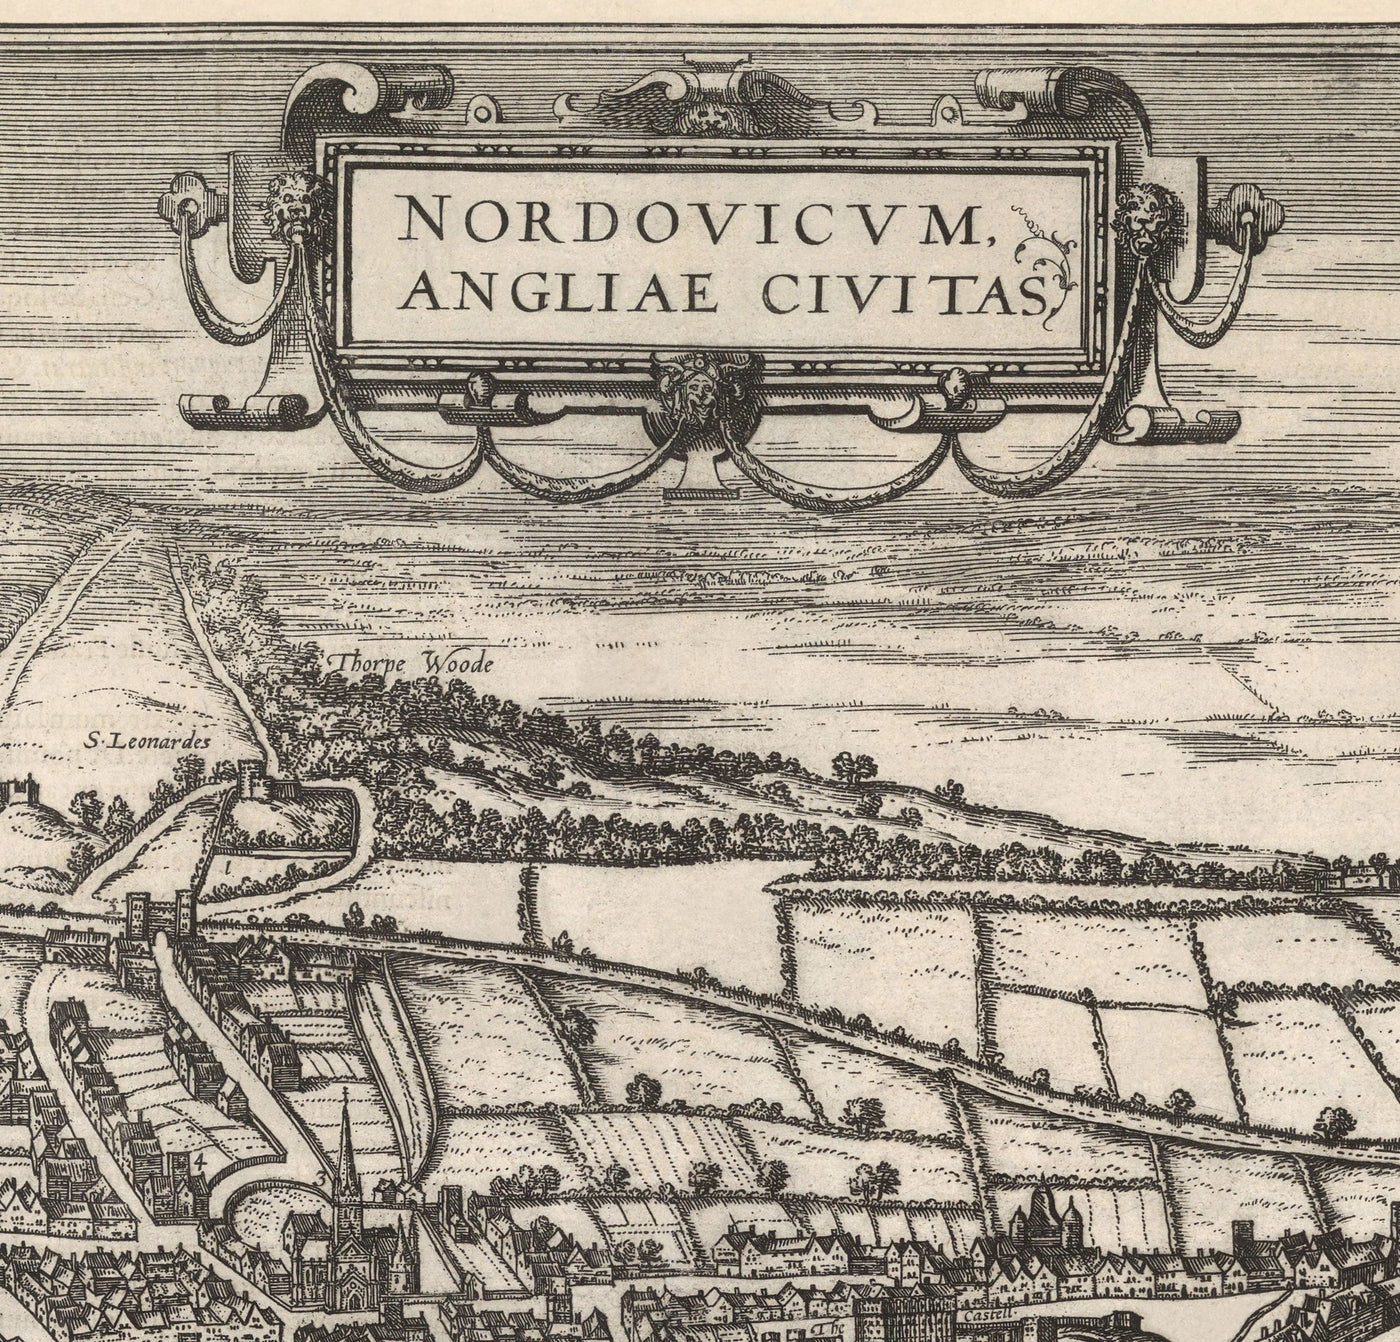 Old Map of Norwich, East Anglia 1581 by Georg Braun, Civitates Orbis Terrarum - Castle, City Walls